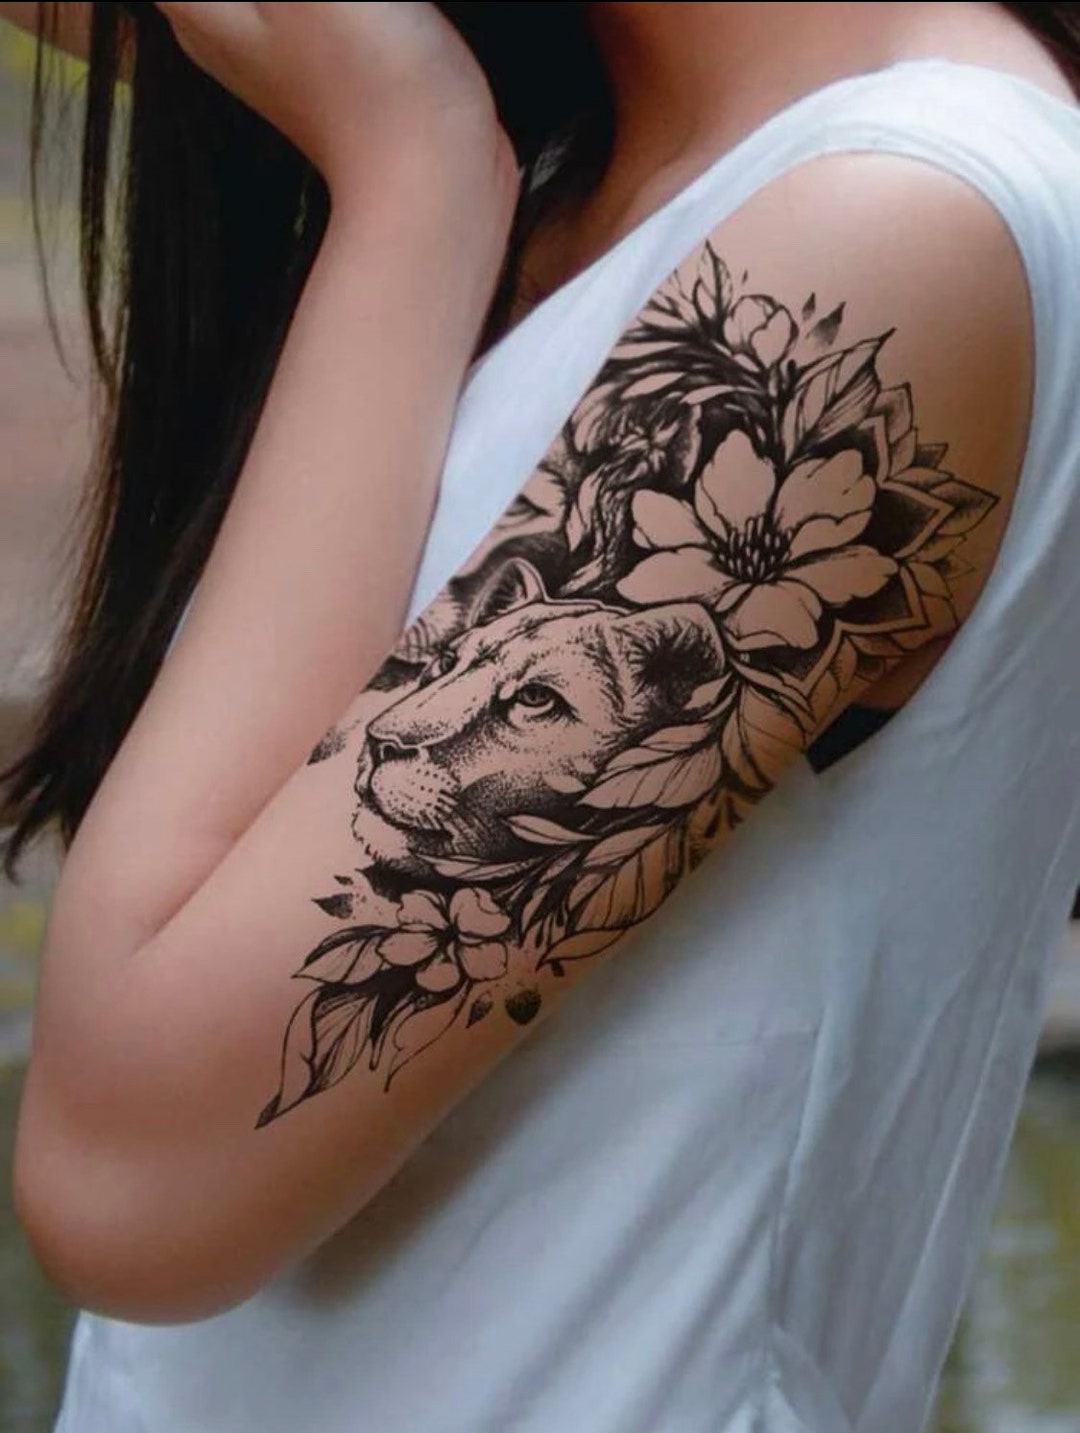 Enter the Jungle: Jaguar Tattoo Ideas with Meaning | Art and Design